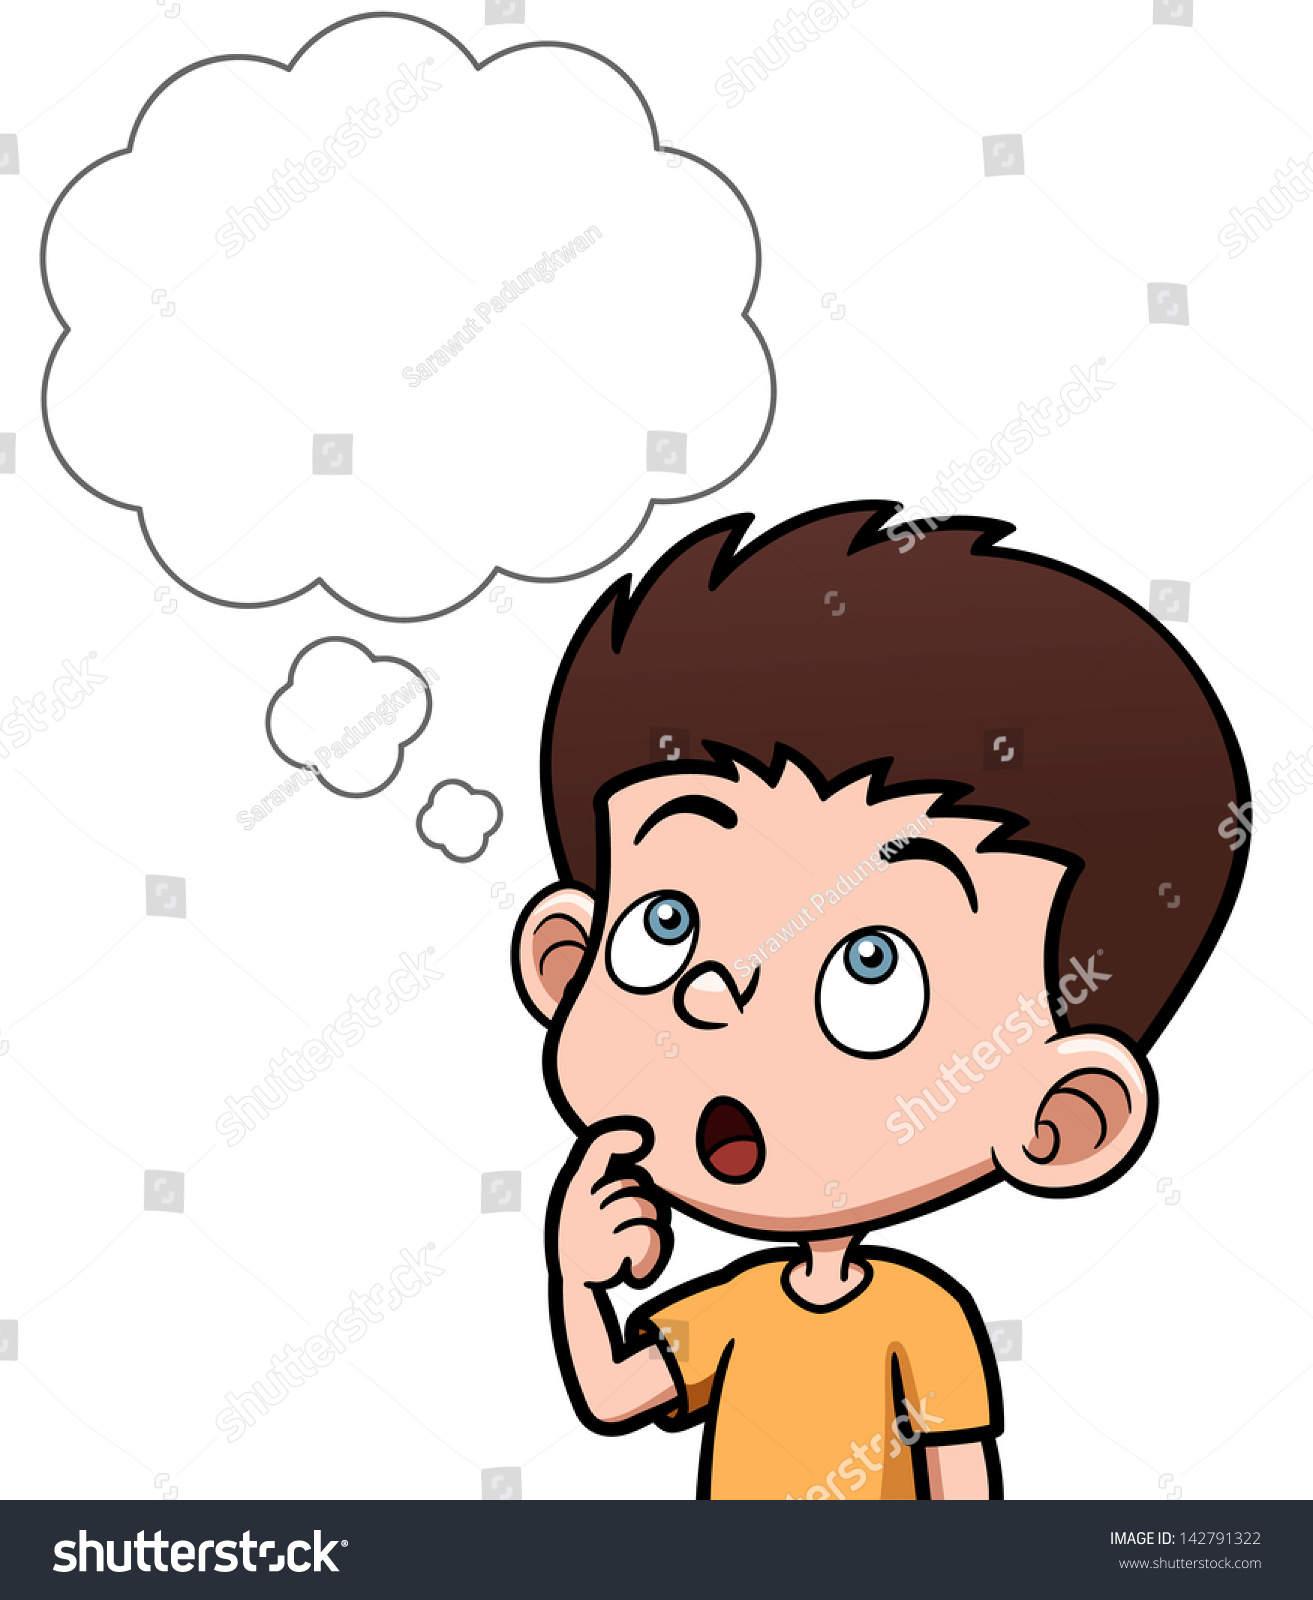 Featured image of post Thinking Face Child Cartoon Intended to show a person pondering or deep in thought